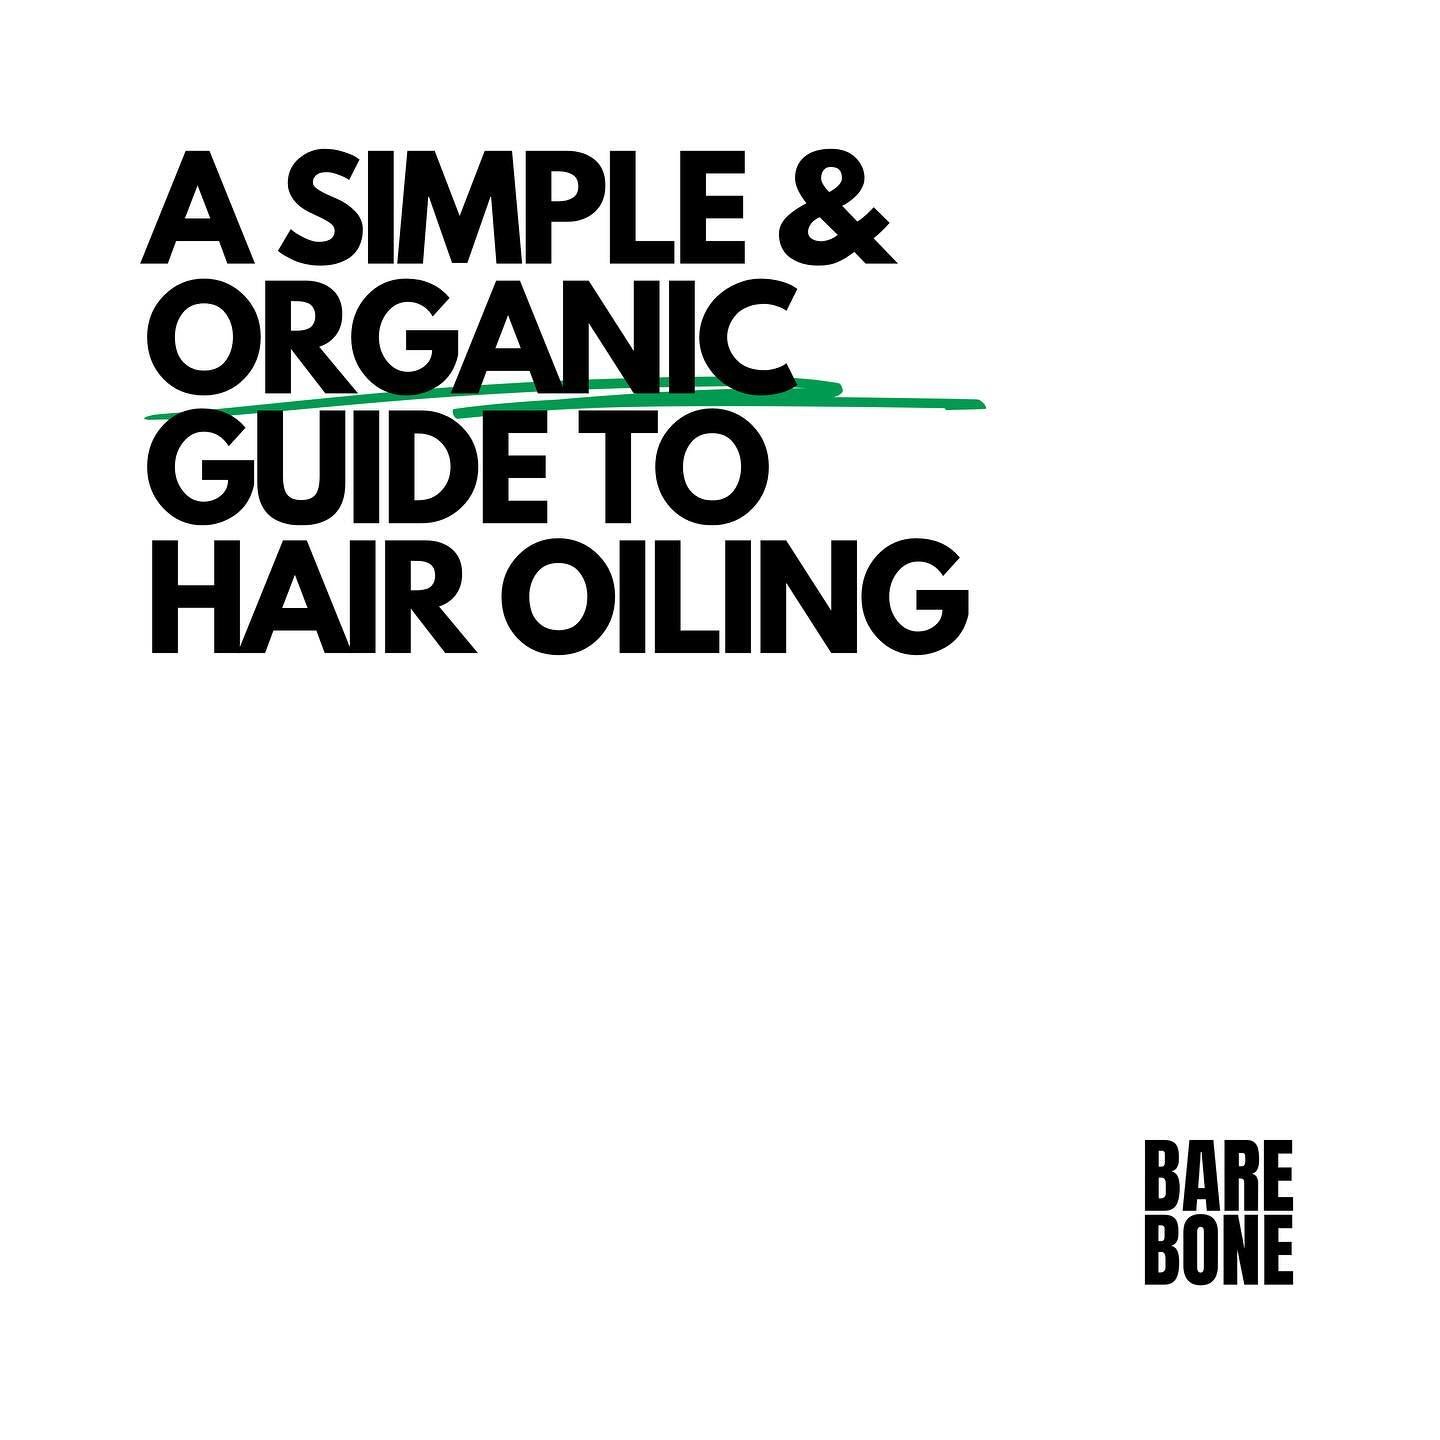 Ready to start your hair oiling journey? Start simple &amp; organic with @shopbarebone 

More questions? Leave a comment below or DM us 📩